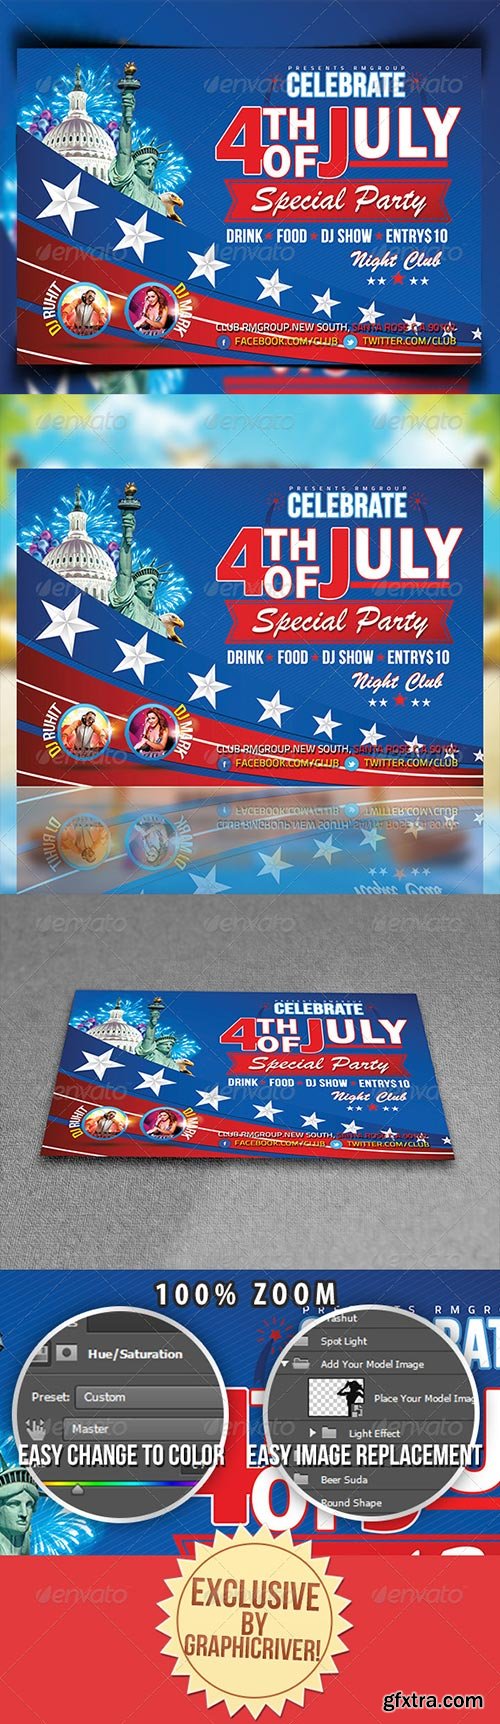 GraphicRiver - Celebrate 4th Of July Party Flyer Template